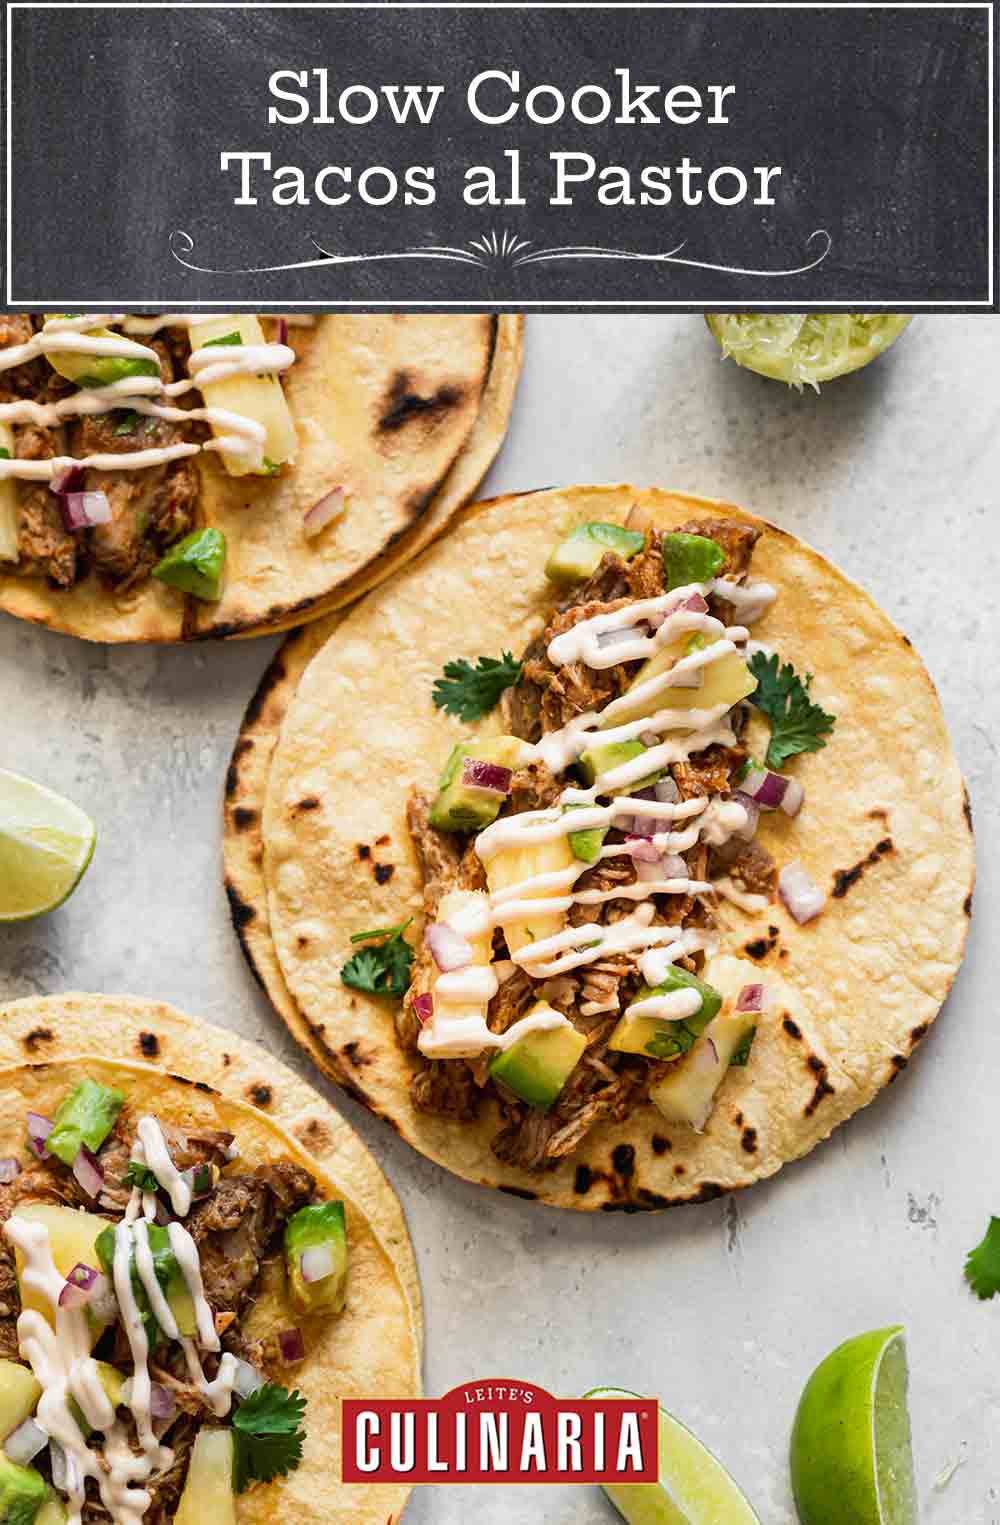 Three assembled slow cooker tacos al pastor with shredded pork, pineapple-avocado salsa, and chipotle mayo, with lime wedges on the side.